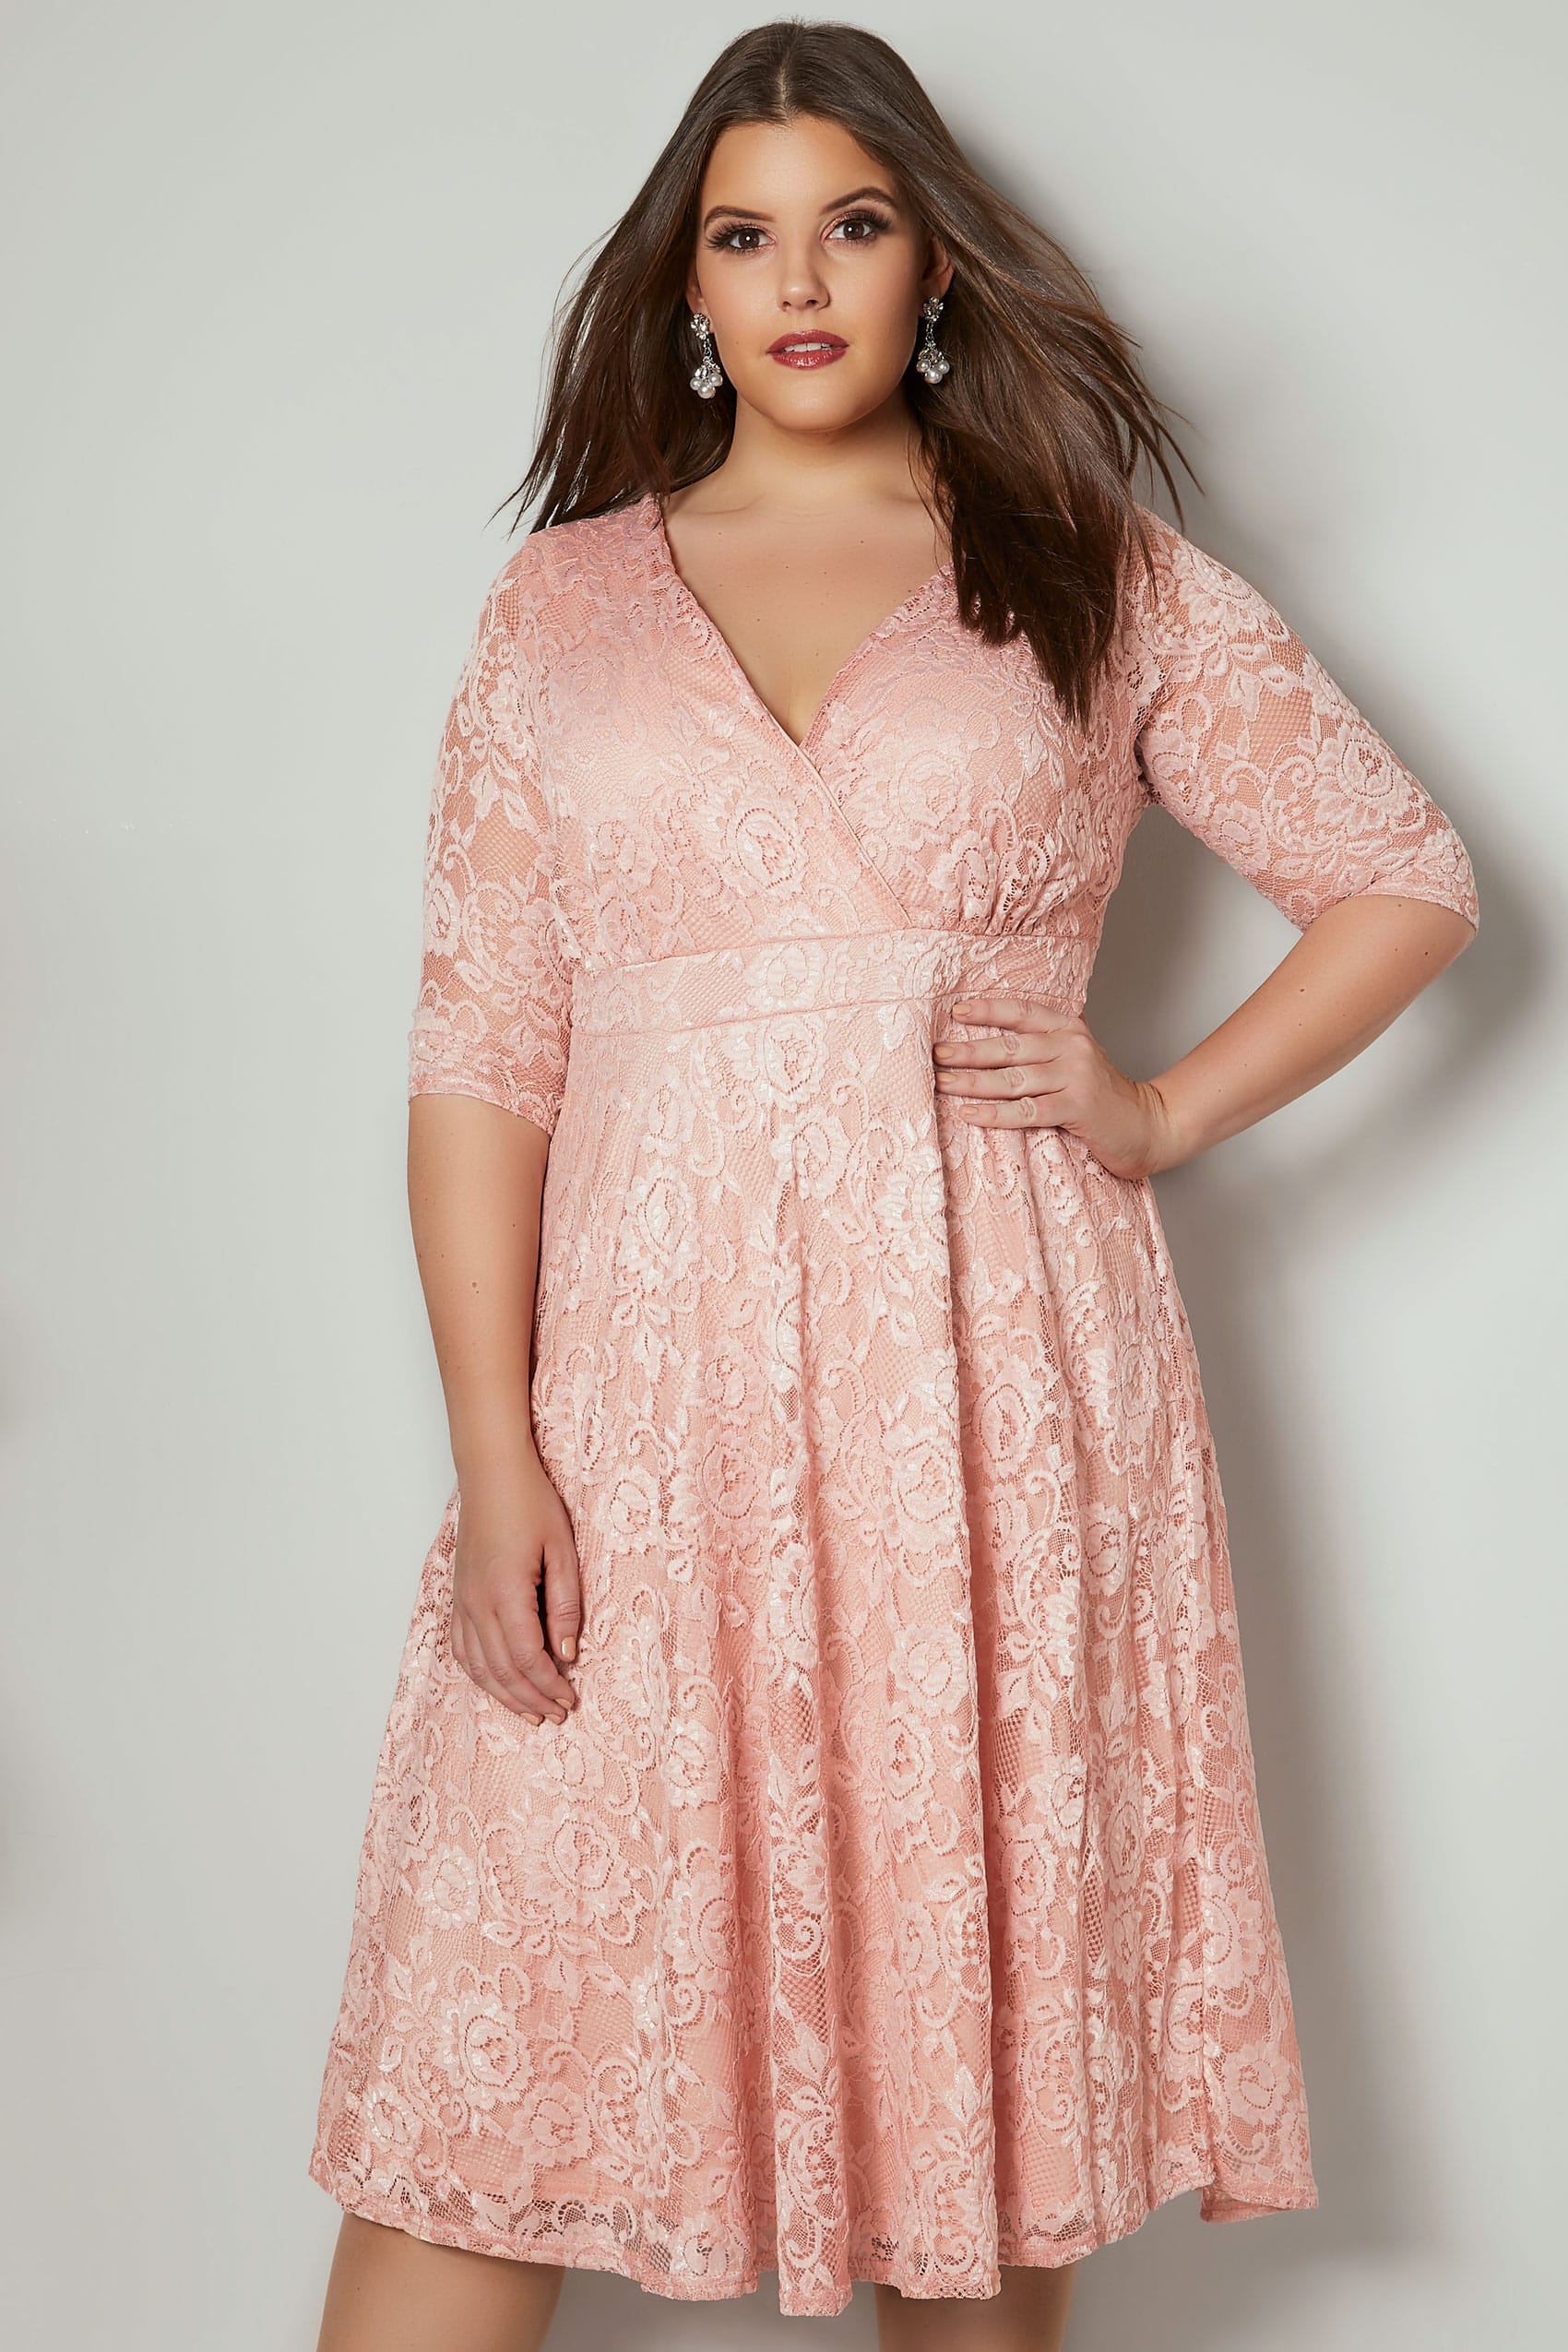 Yours London Pink Floral Lace Wrap Dress Plus Size 16 To 32 8722